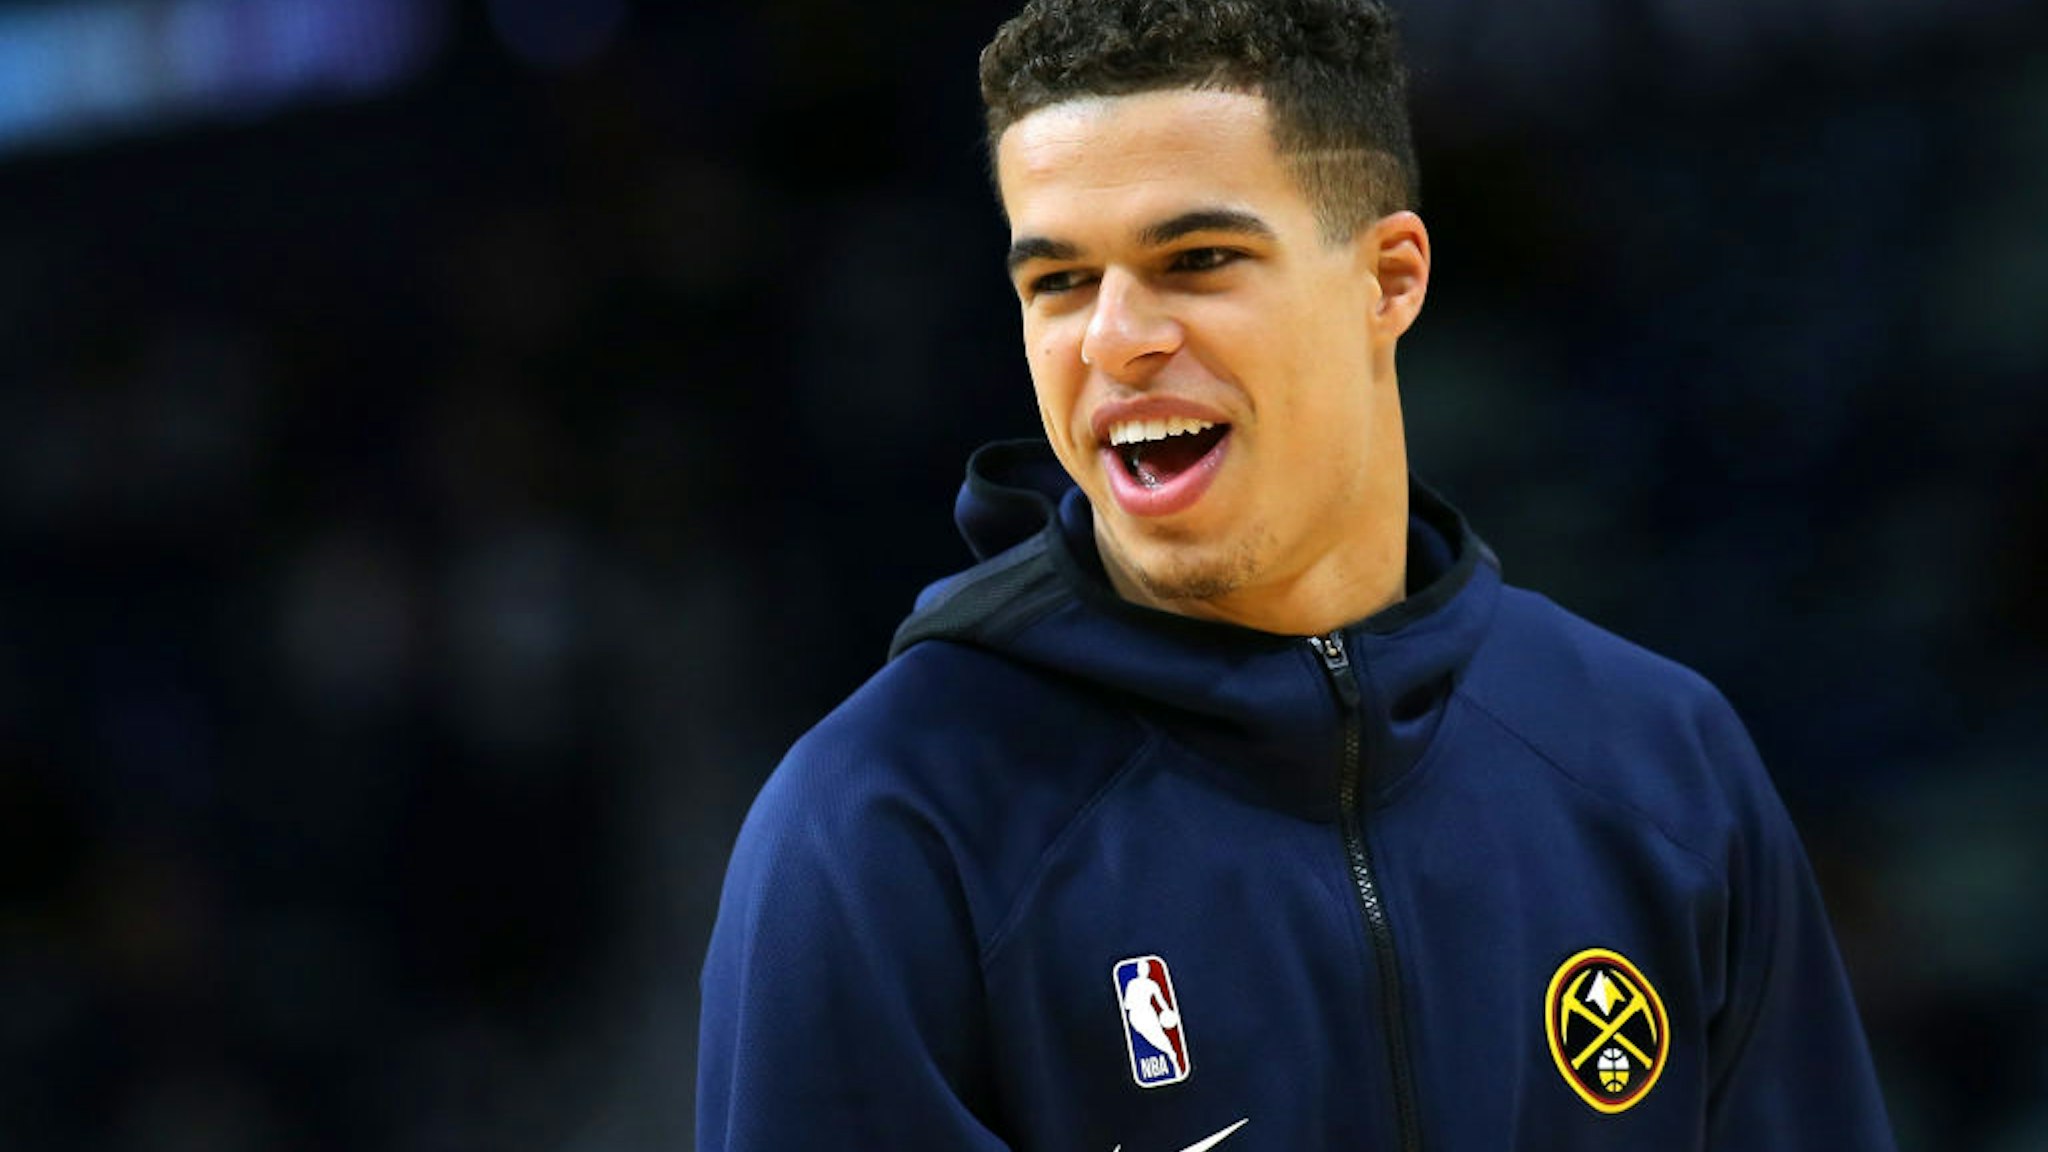 Michael Porter Jr. #1 of the Denver Nuggets reacts during a game against the New Orleans Pelicans at the Smoothie King Center on October 31, 2019 in New Orleans, Louisiana.